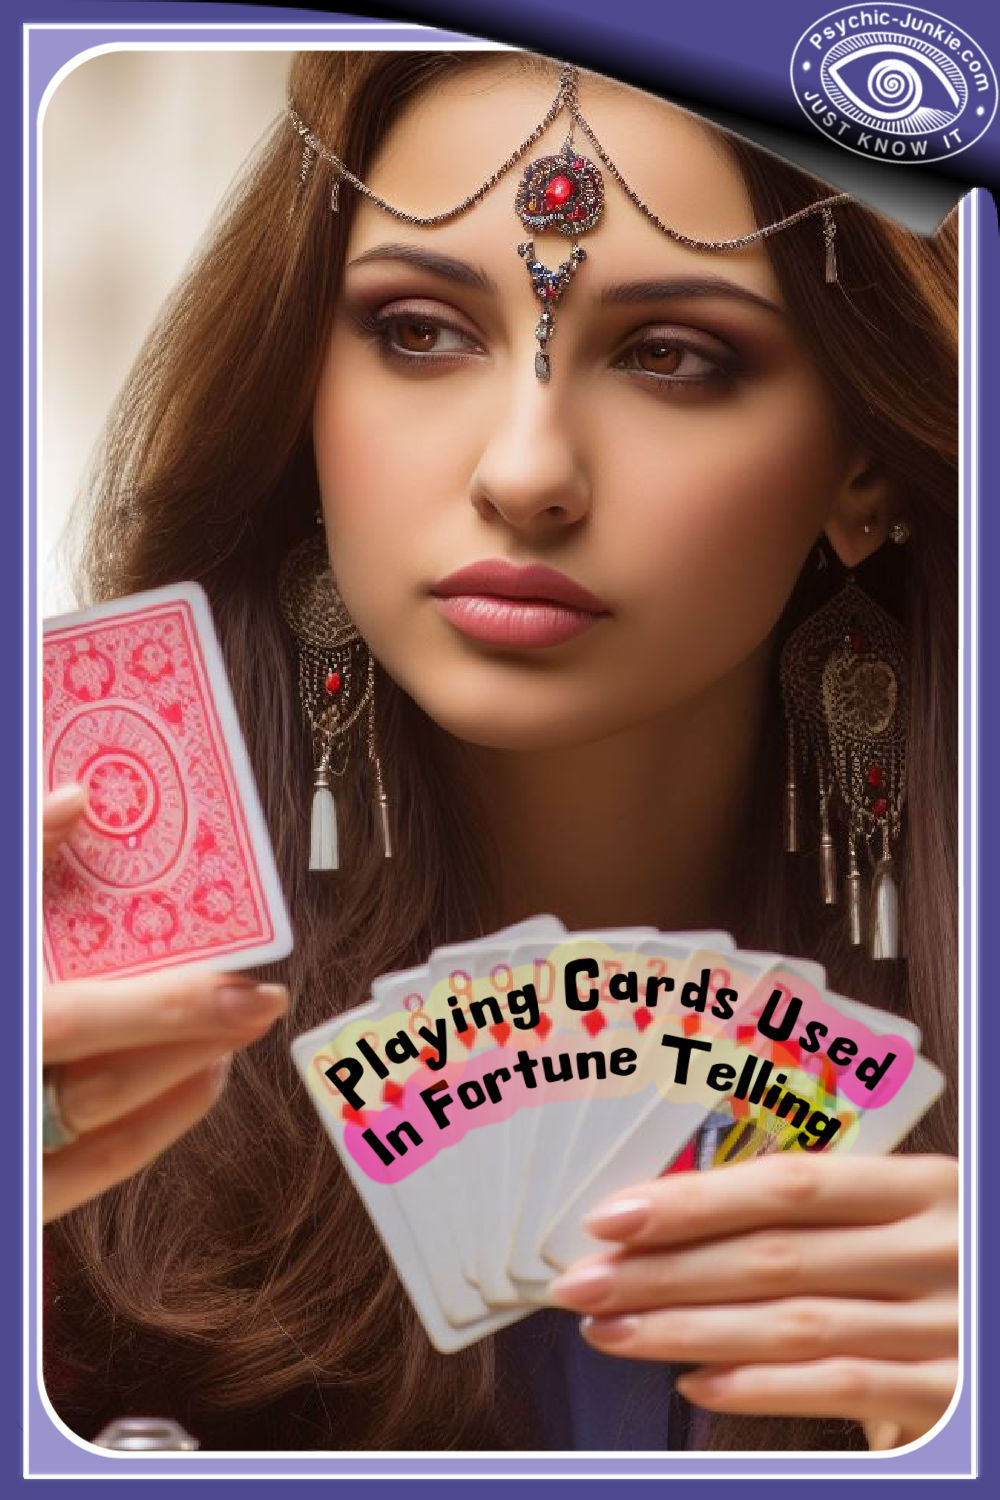 Playing Cards Used For Fortune Telling